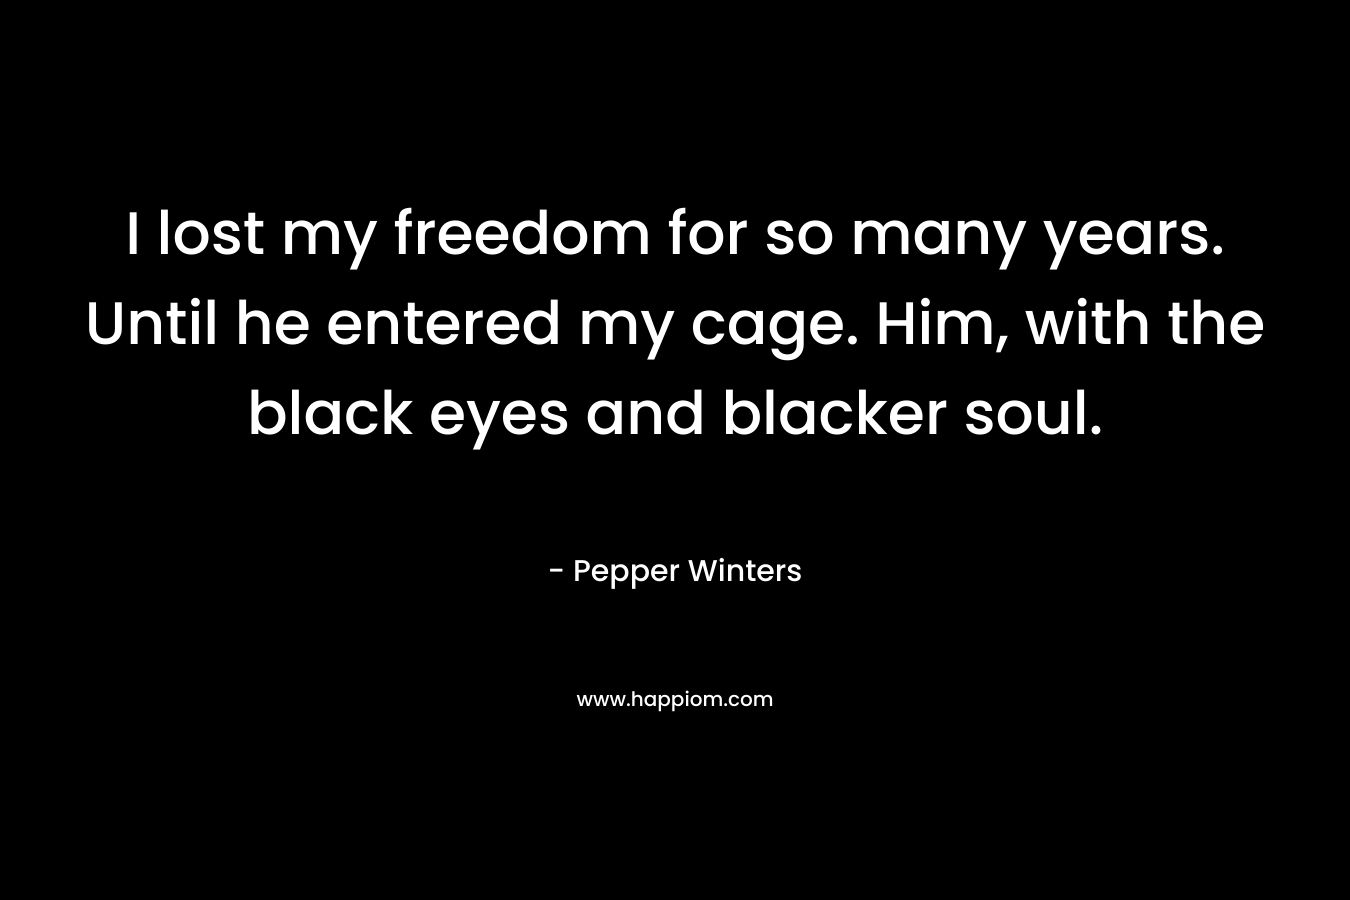 I lost my freedom for so many years. Until he entered my cage. Him, with the black eyes and blacker soul. – Pepper Winters